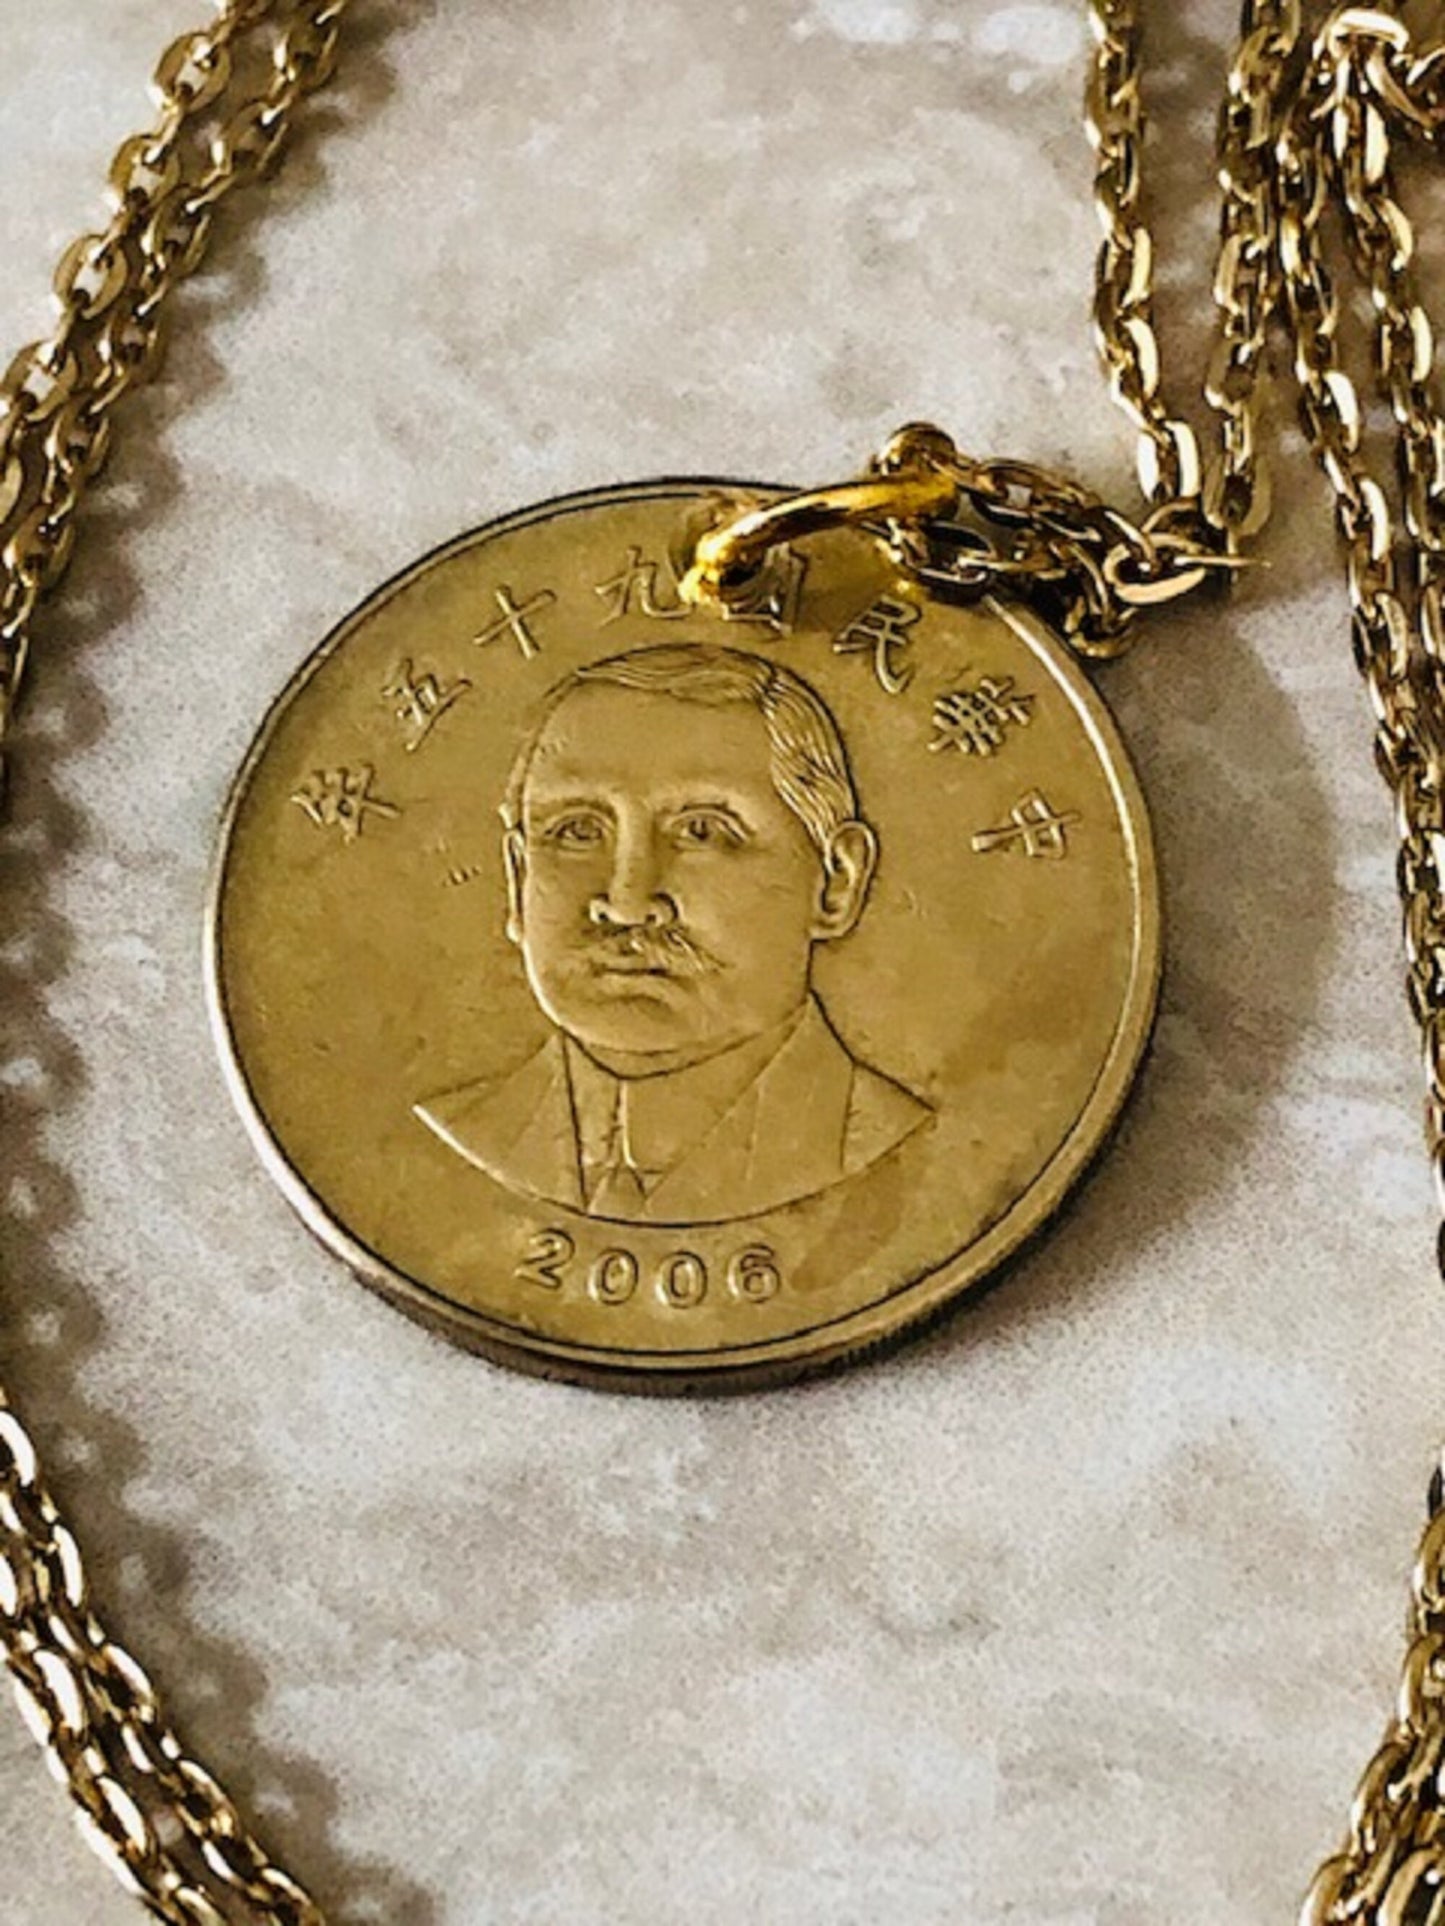 Japan Coin Necklace Hologram 50 Pendant Japanese Personal Old Vintage Handmade Jewelry Gift Friend Charm For Him Her World Coin Collector